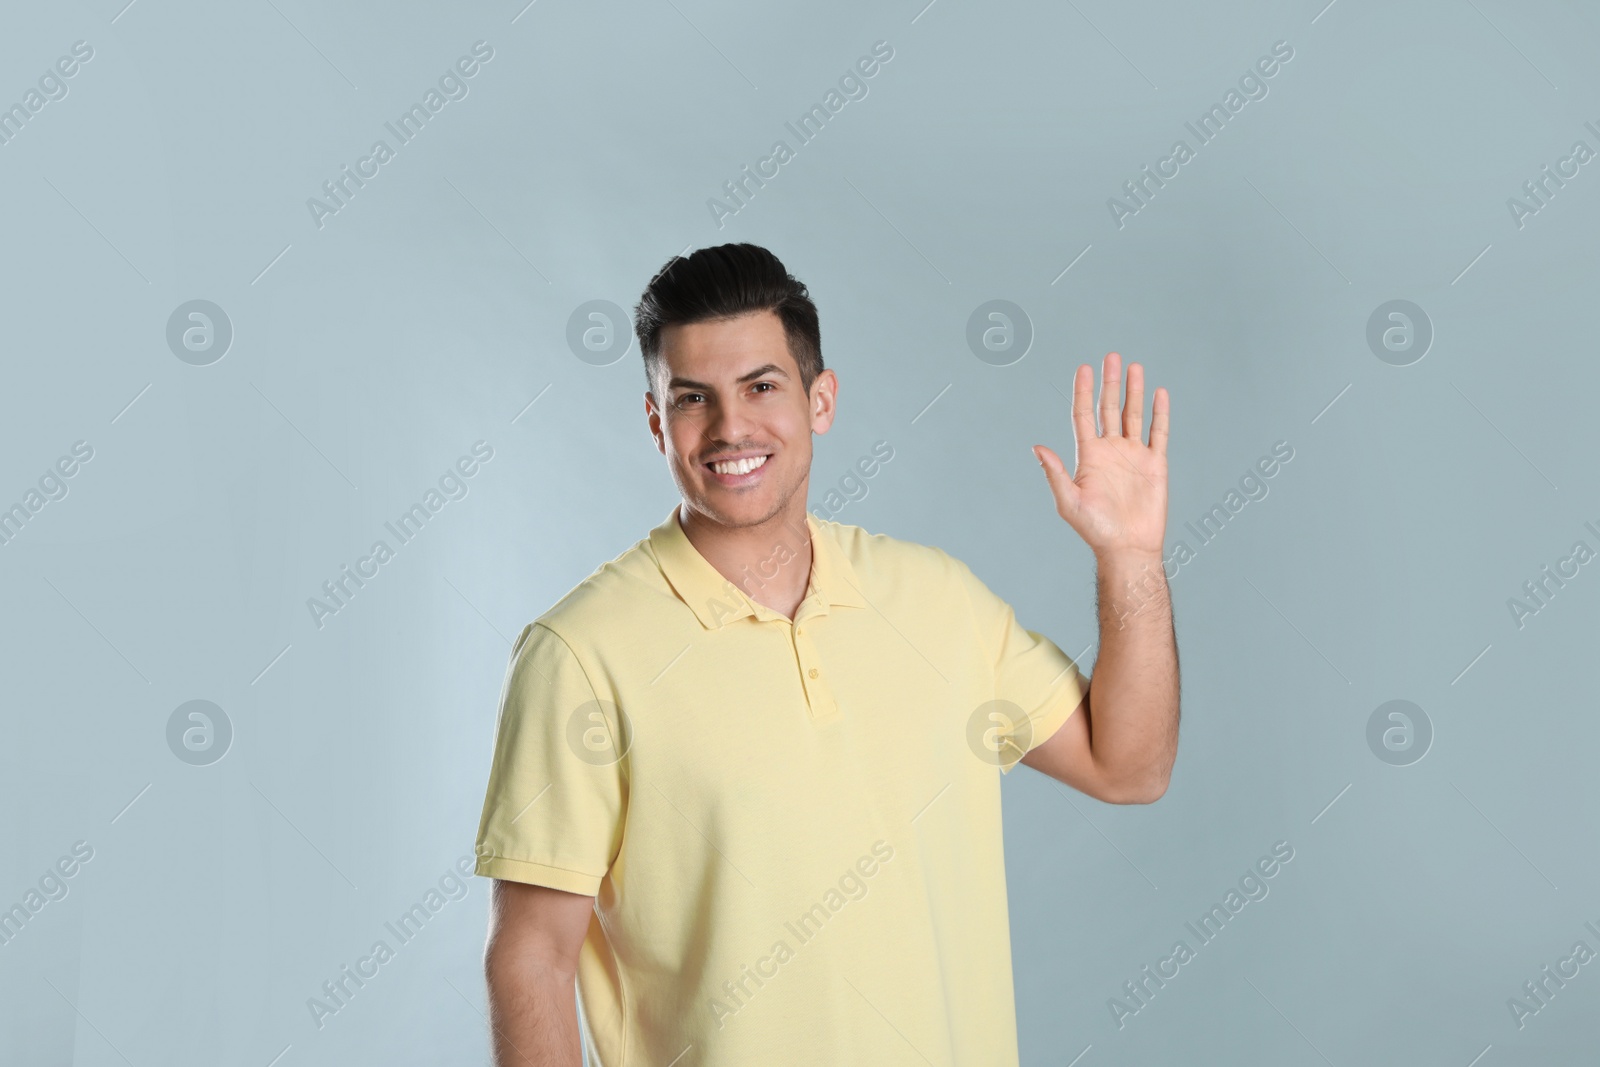 Photo of Cheerful man waving to say hello on grey background